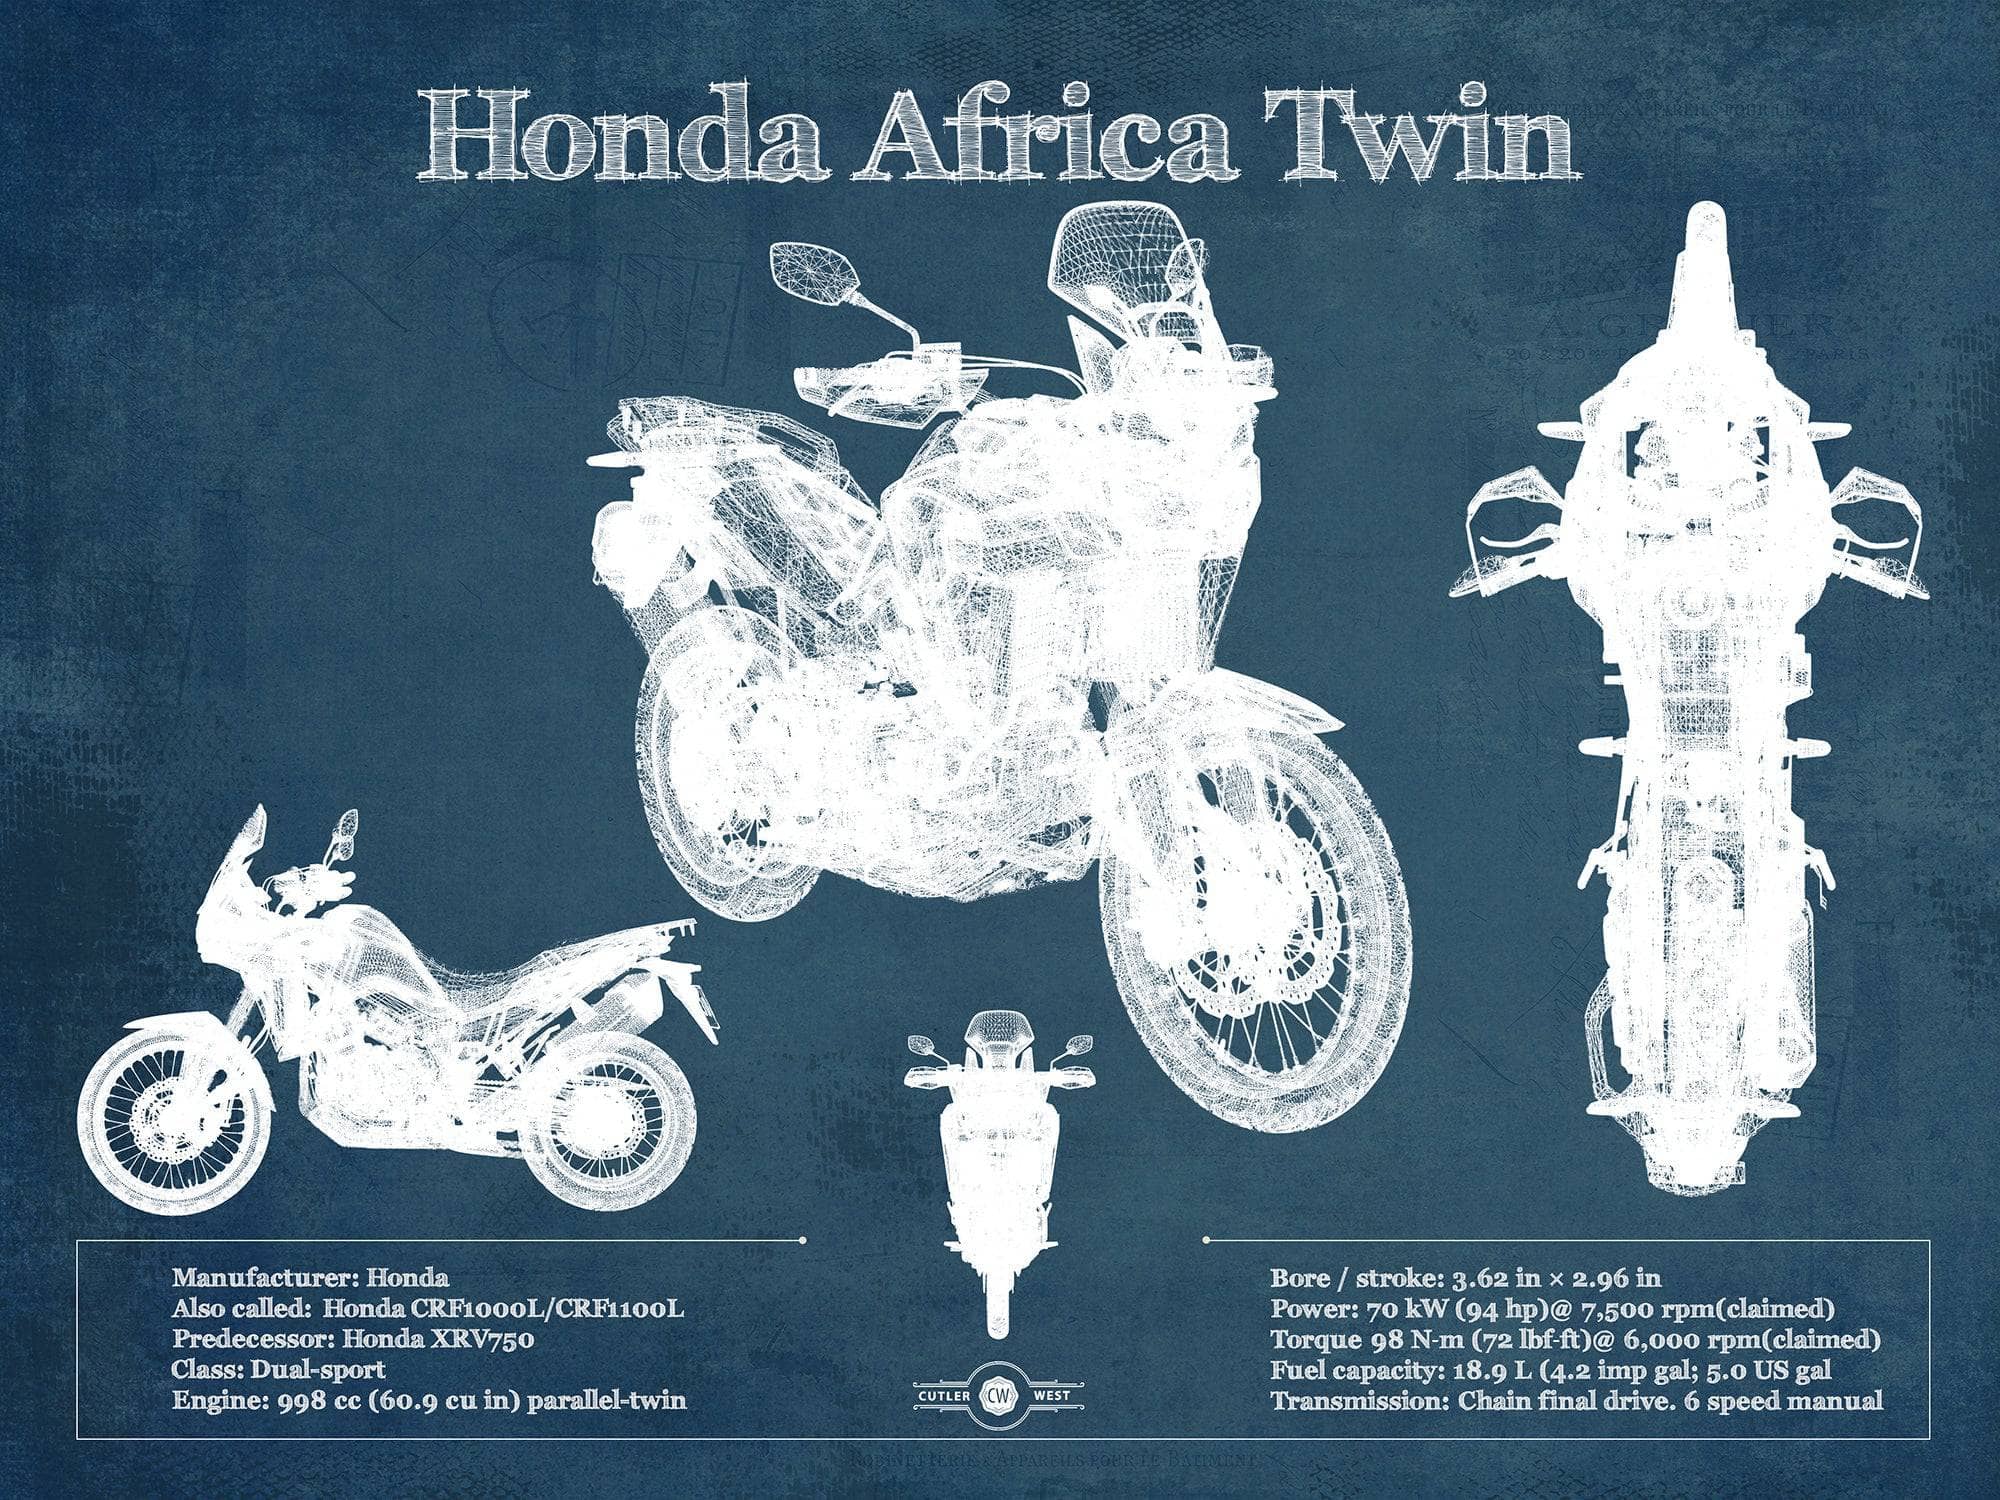 Cutler West 14" x 11" / Unframed Honda CRF1000L/CRF1100 Africa Twin Motorcycle Patent Print 933350100_15962